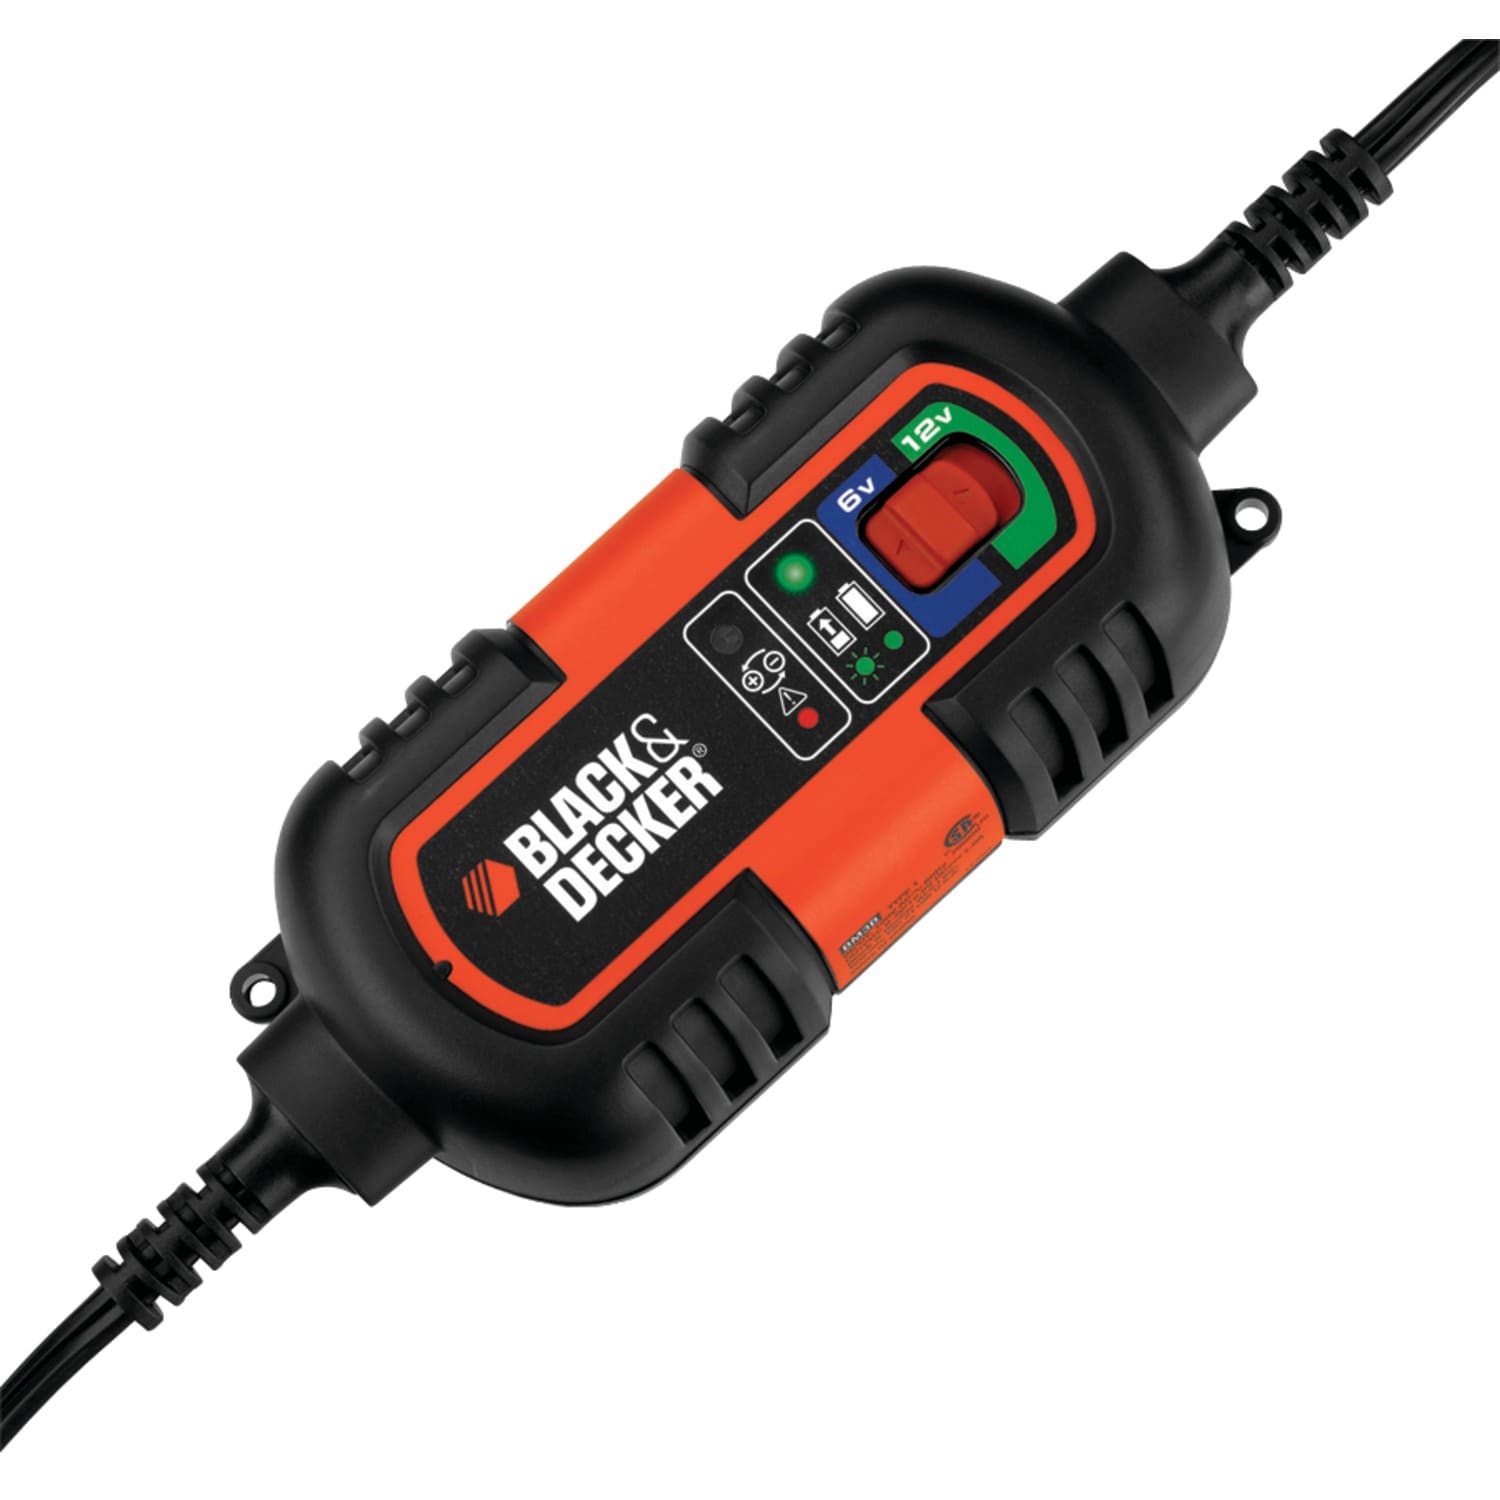 New Black & Decker GoPak 12V Max Tool Battery Doubles as a Phone Charger